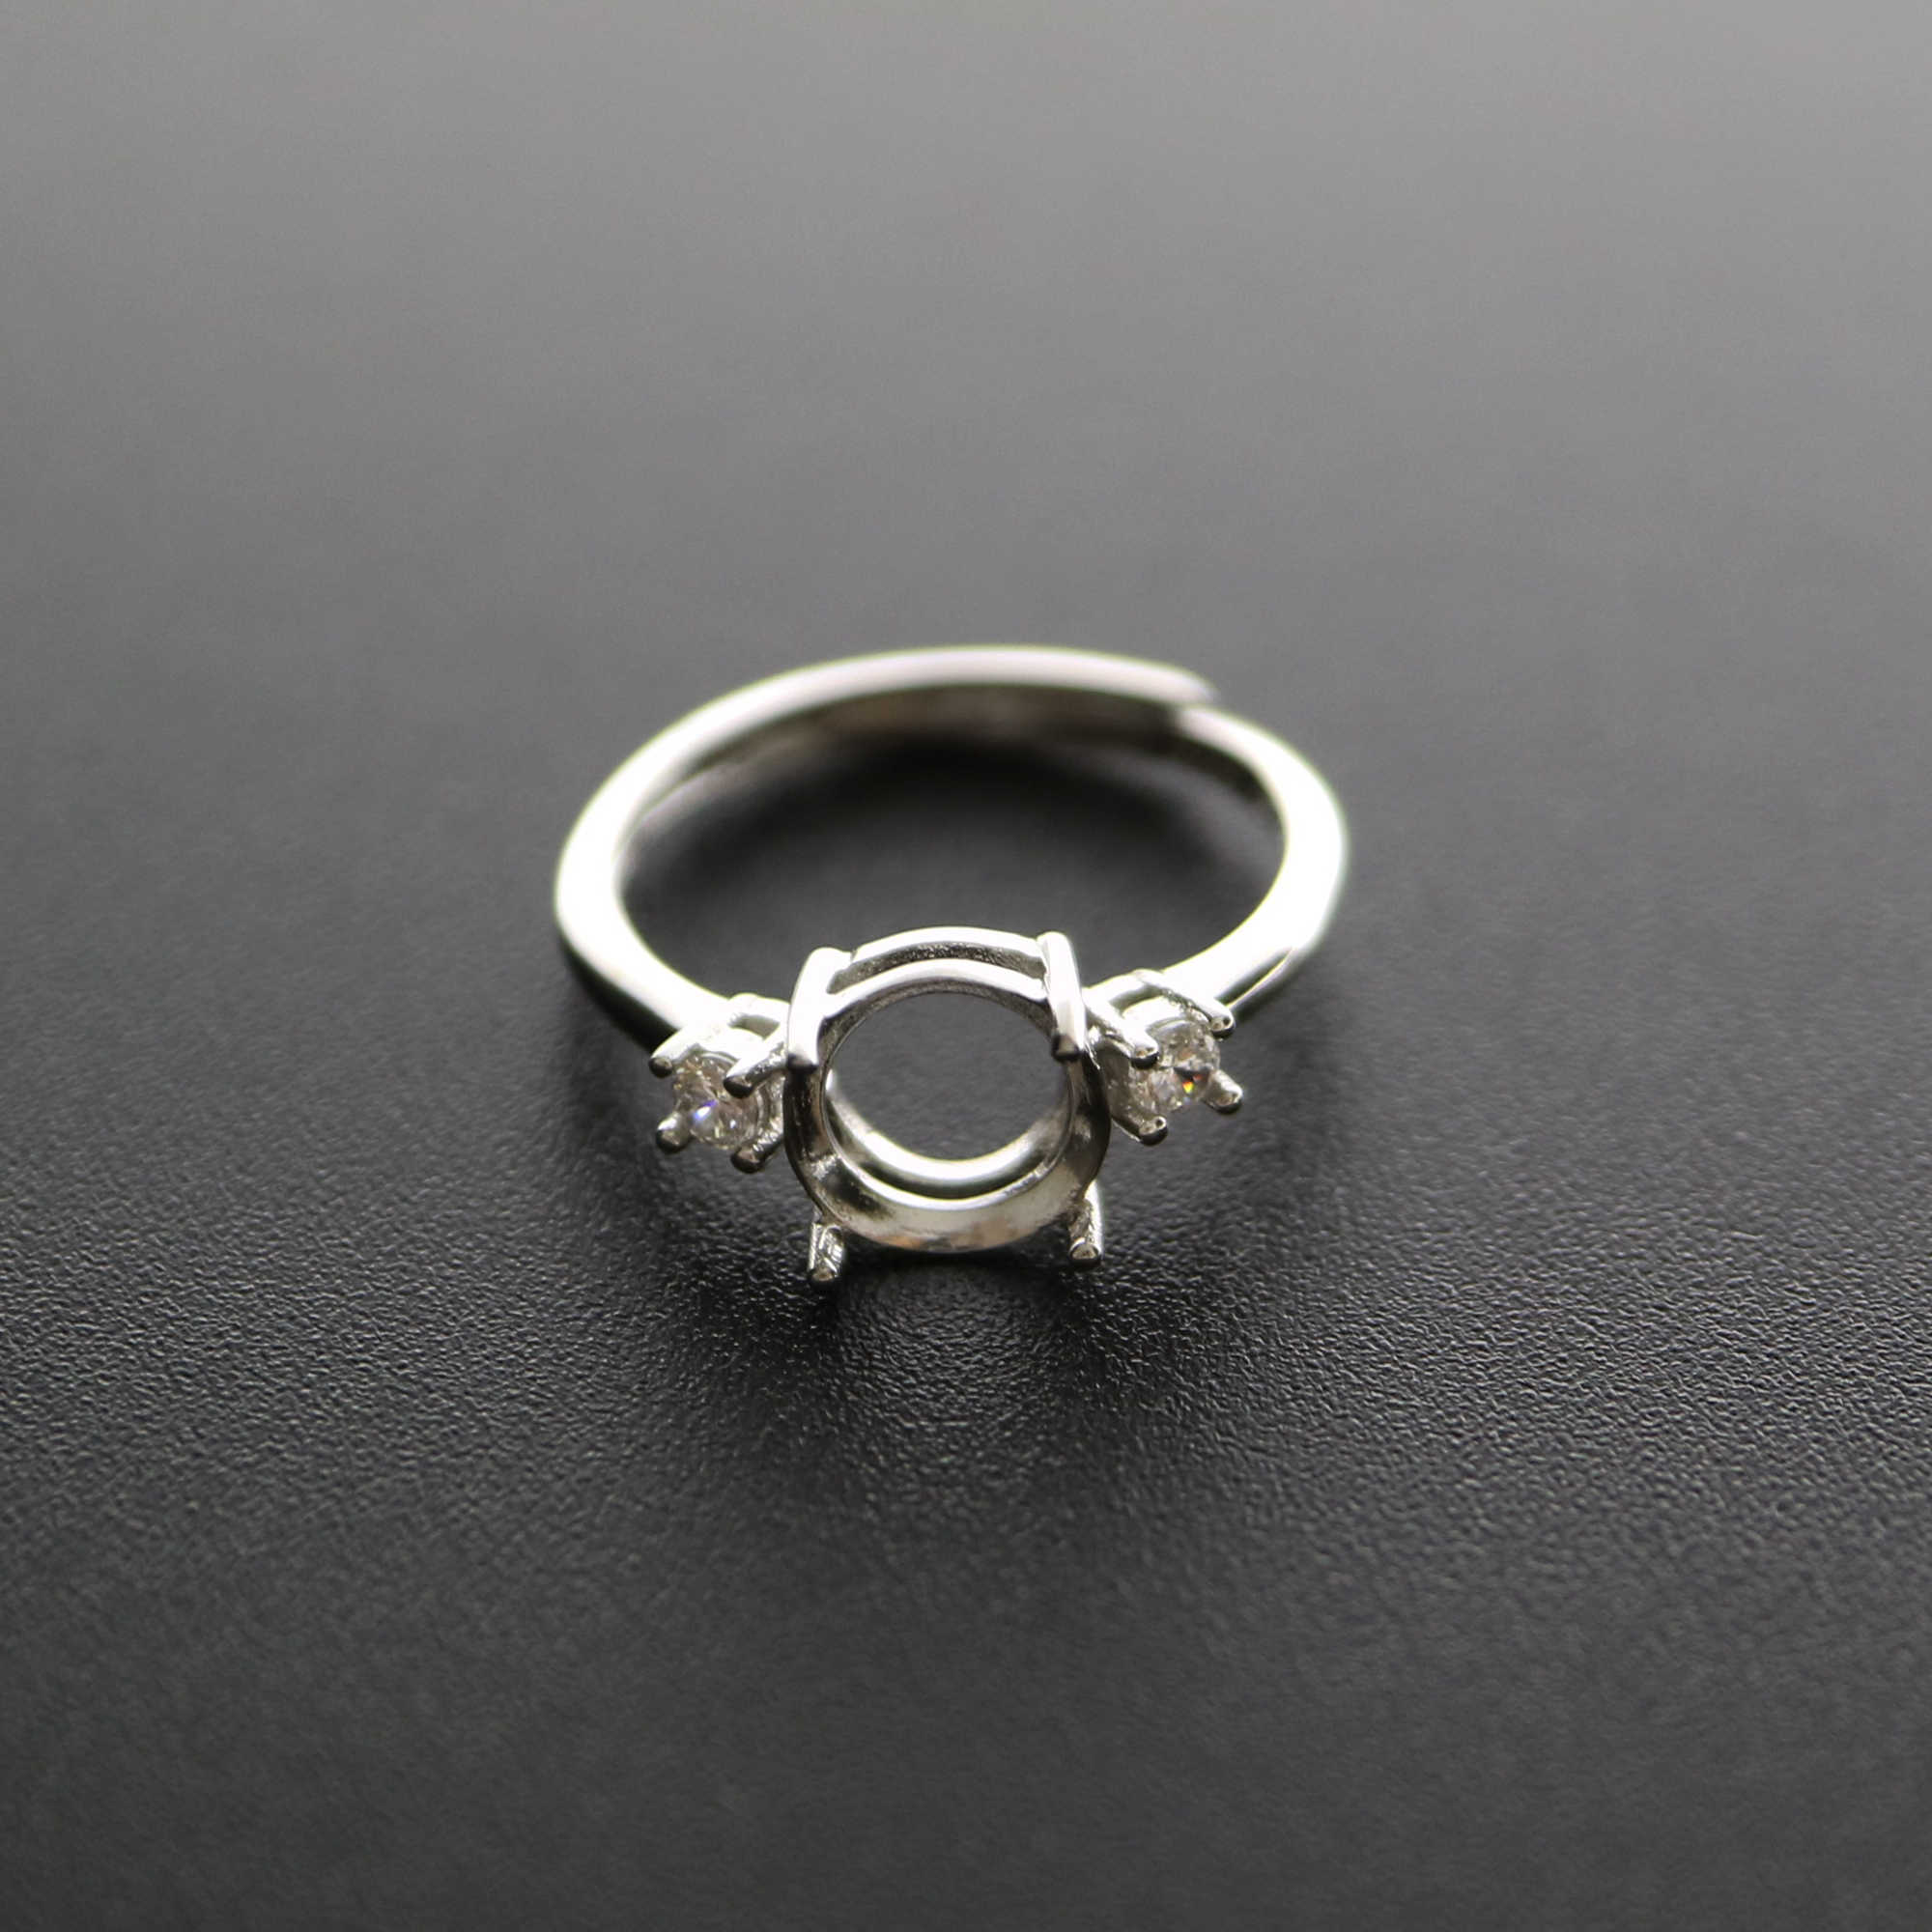 1Pcs 5-8MM Round Simple Silver Gemstone Cz Stone Prong Bezel Solid 925 Sterling Silver Adjustable Ring Settings 1214033 - Click Image to Close